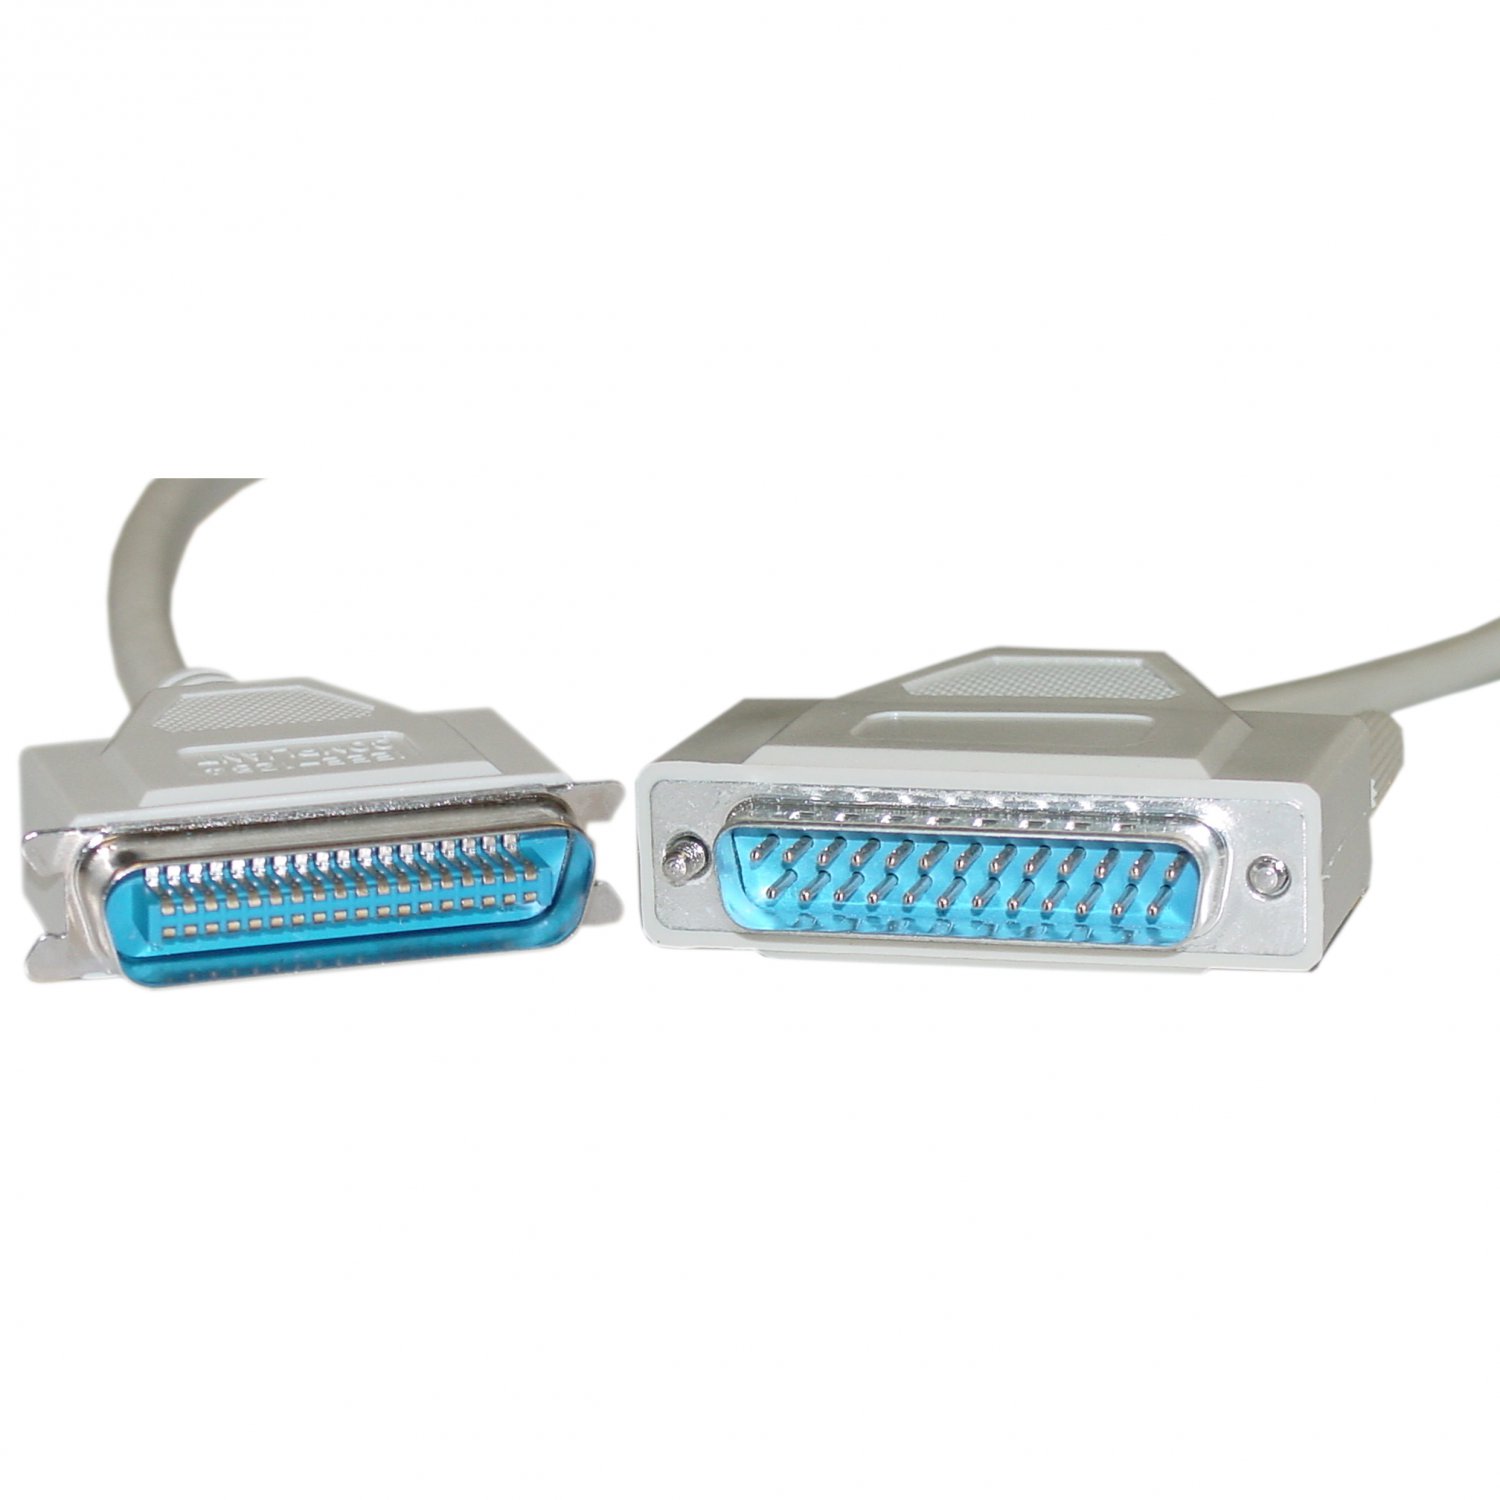 6ft Bidirectional Printer Cable, DB25 Male to Centronics 36 (CN36) Male, IEEE-1284 10E2-01106